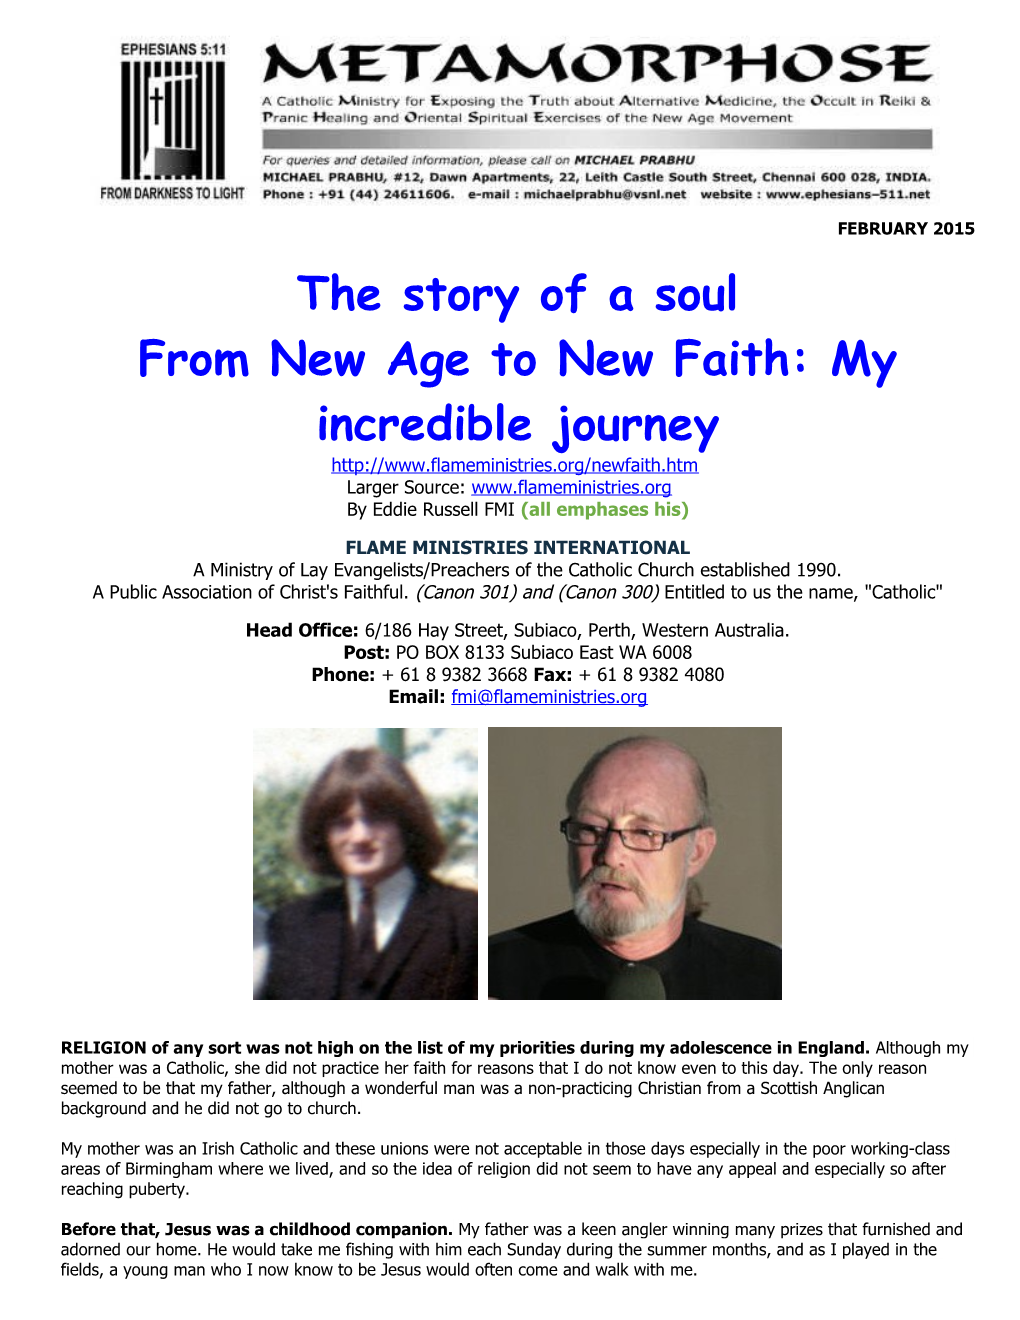 From New Age to New Faith: My Incredible Journey